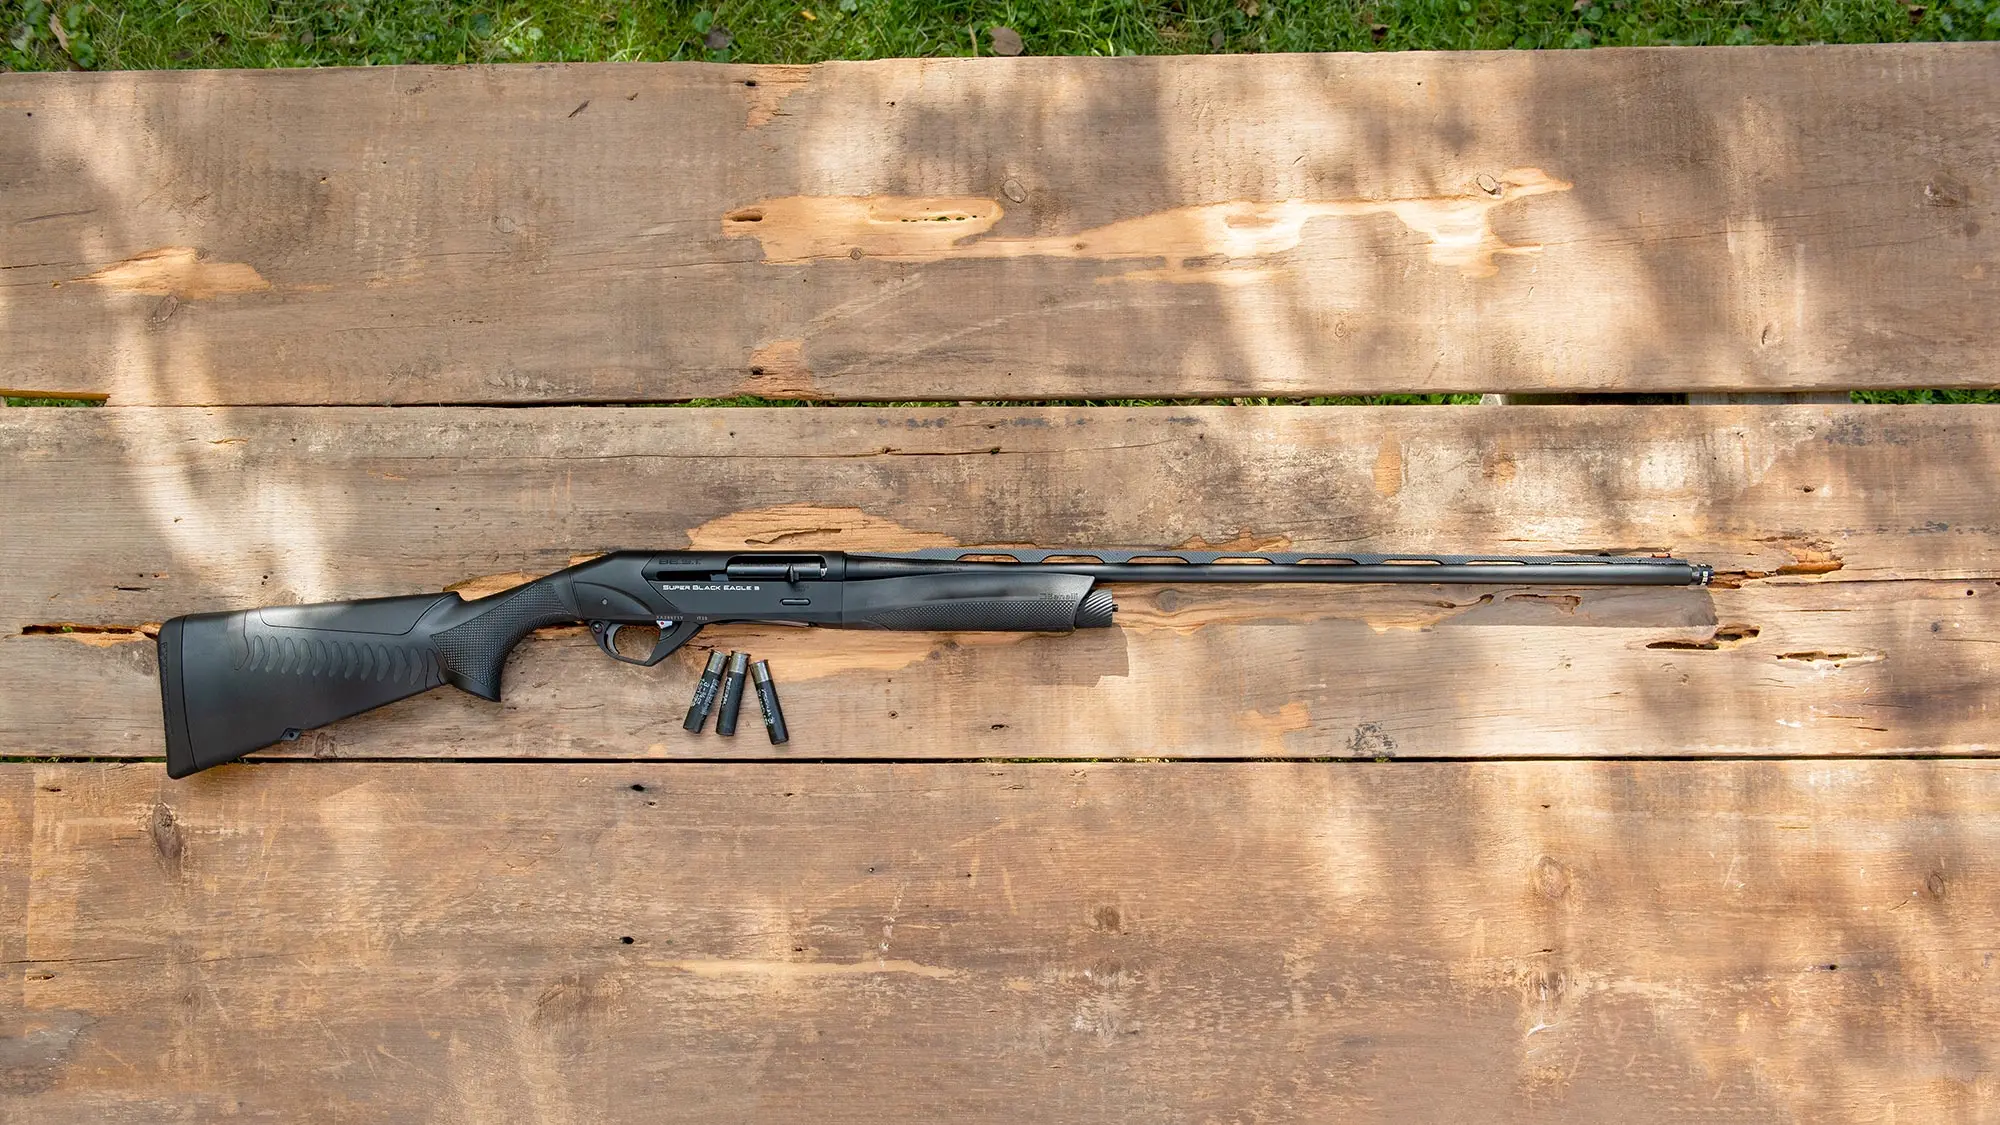 The new Benelli 28-gauge SBE3 BE S.T. shotgun lying on a table with shotgun shells.